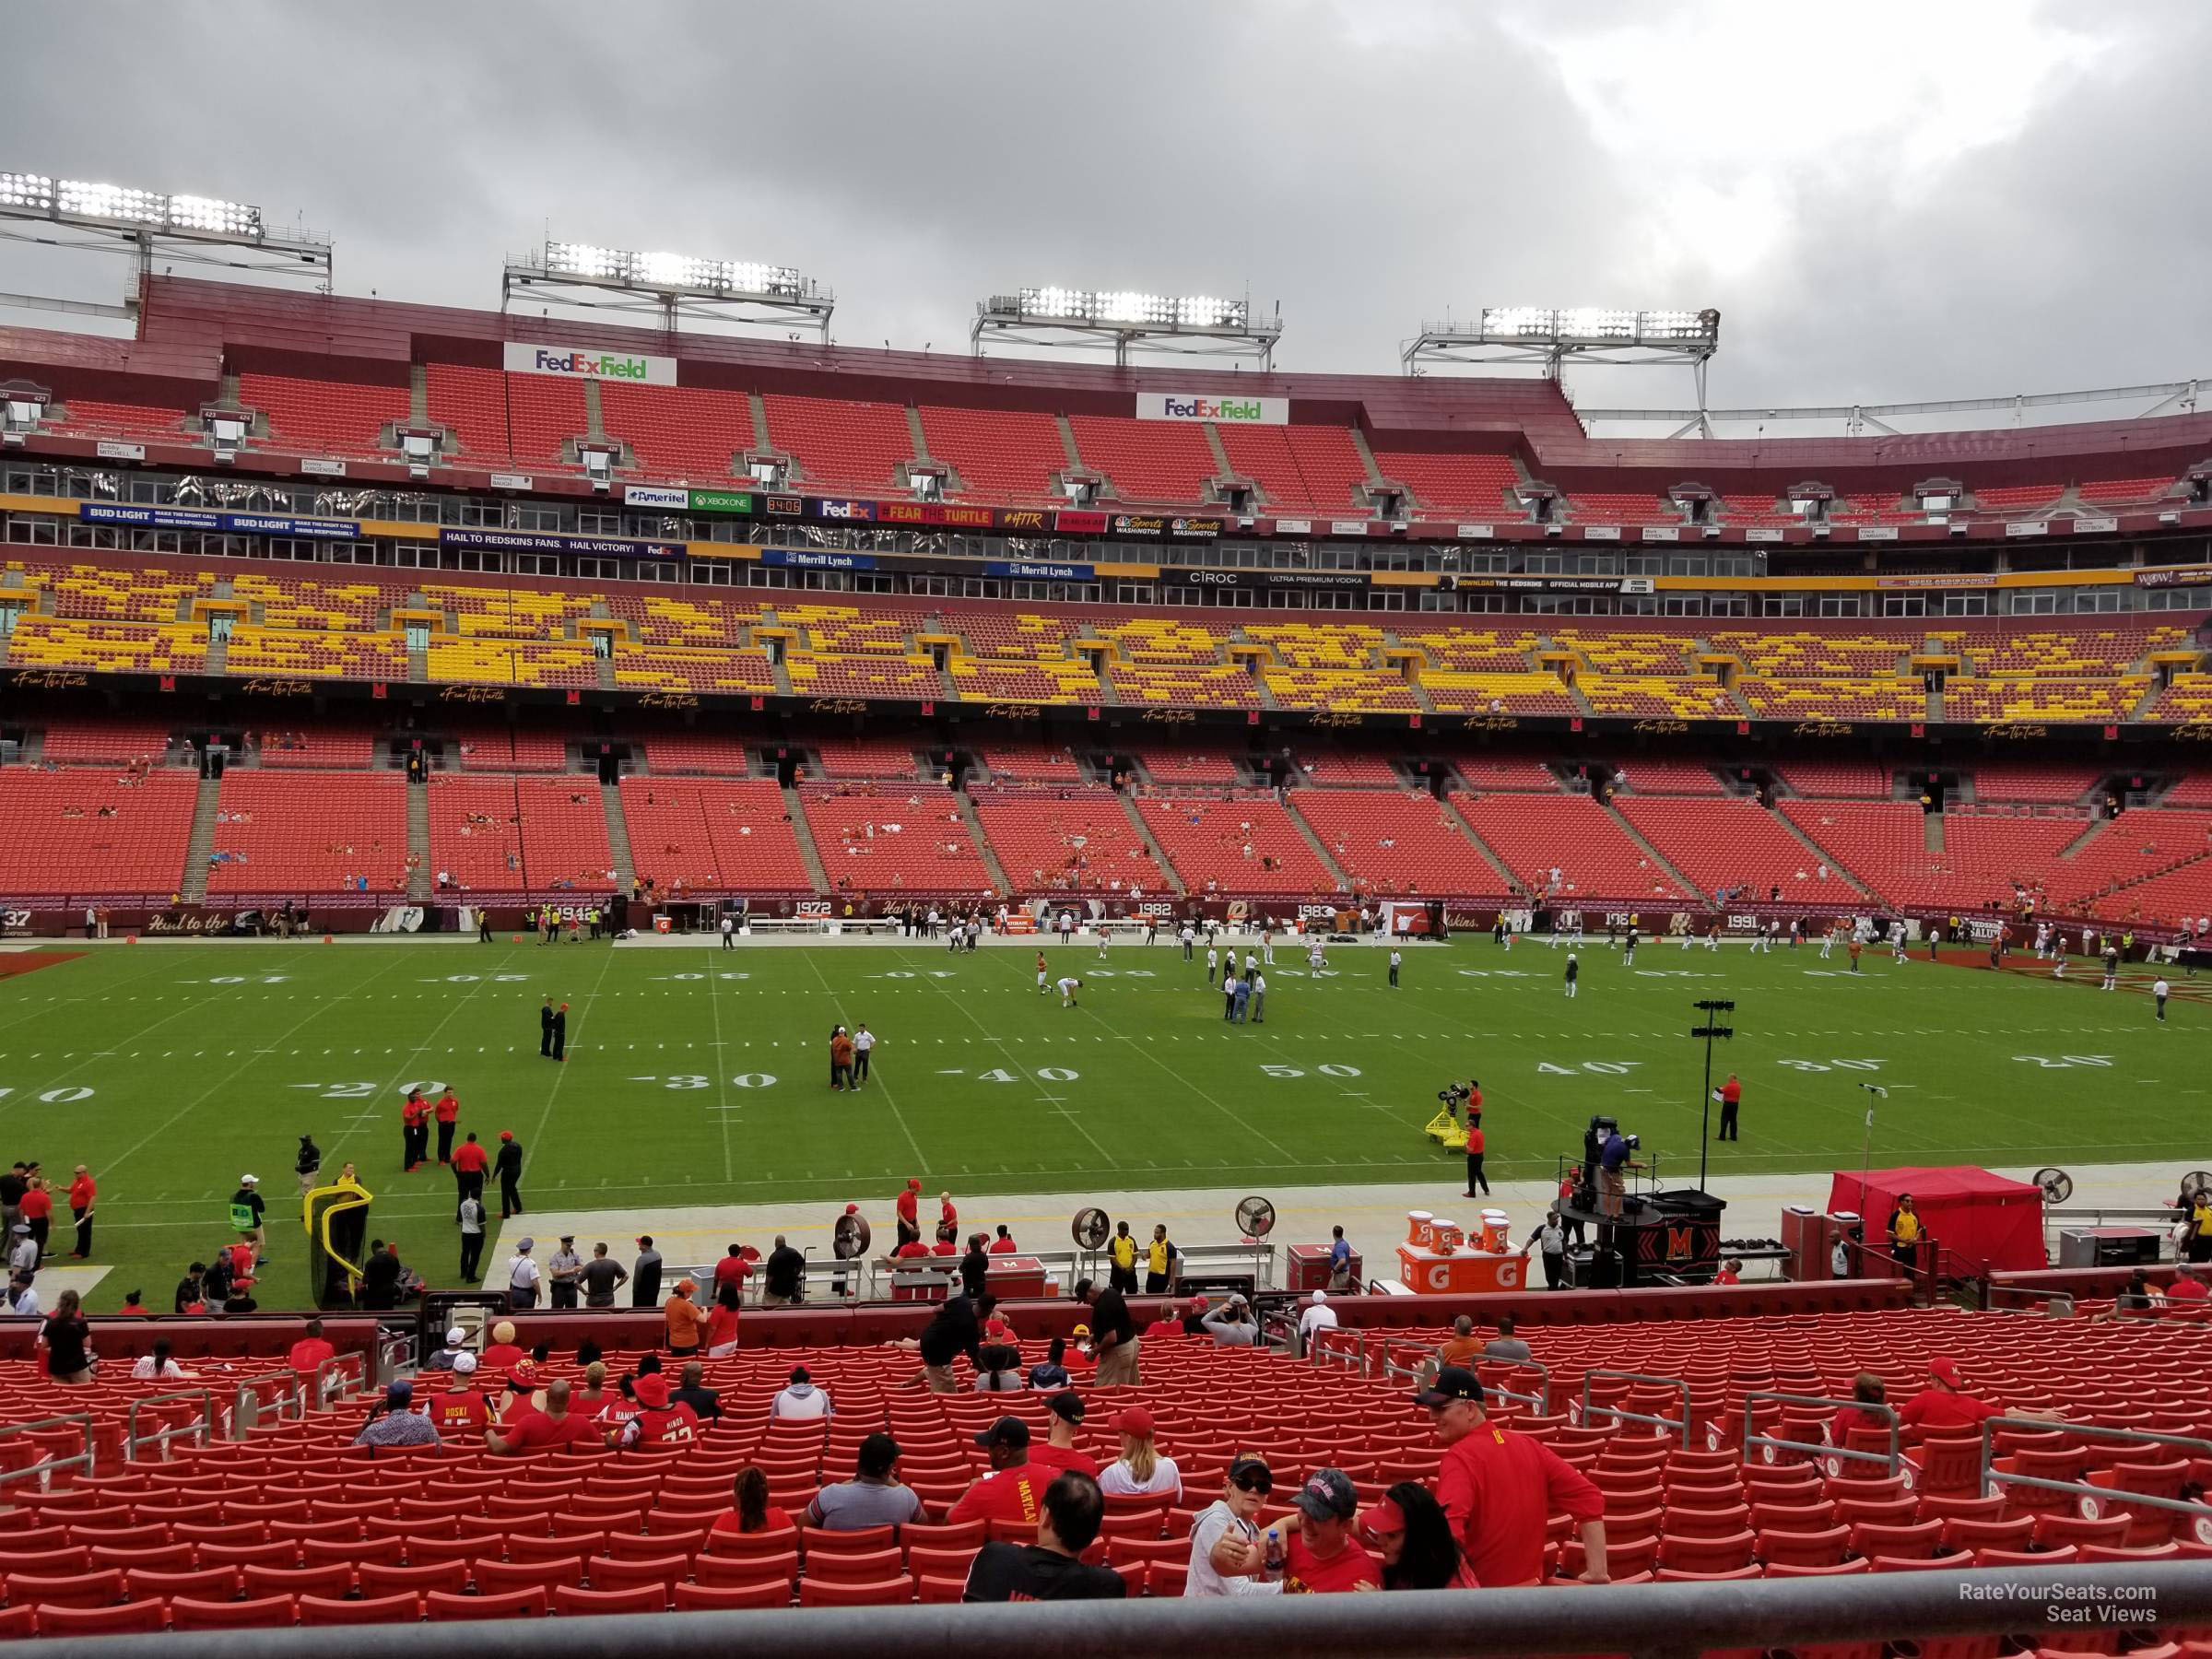 section 203, row 1 seat view  - fedexfield